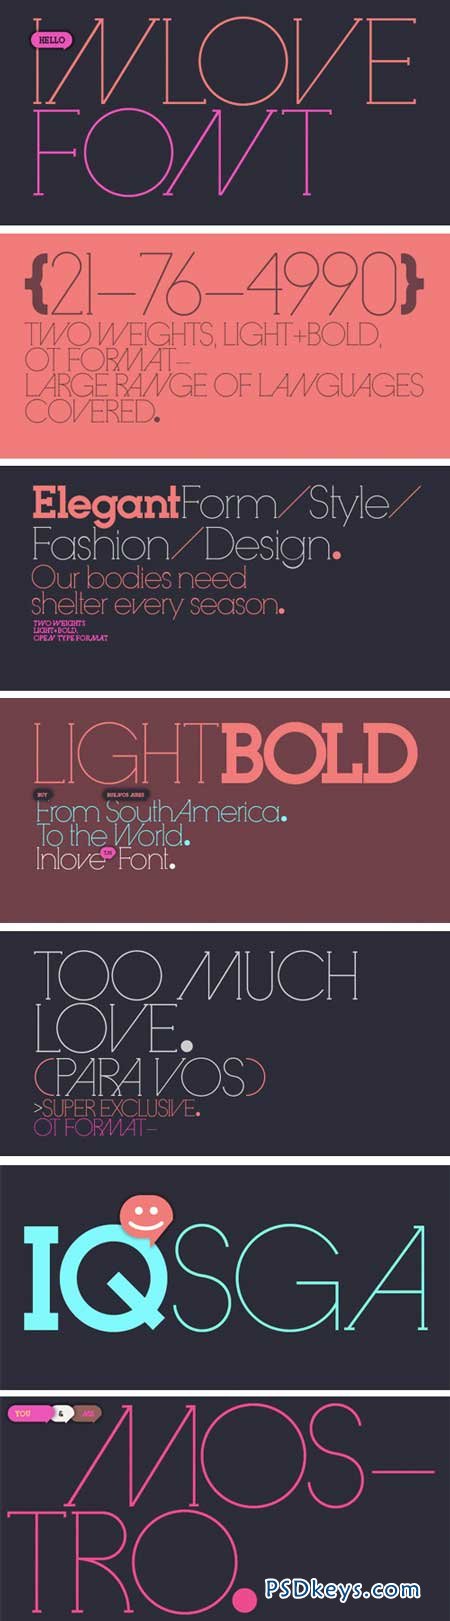 Inlove Font Family - 2 Fonts for $49